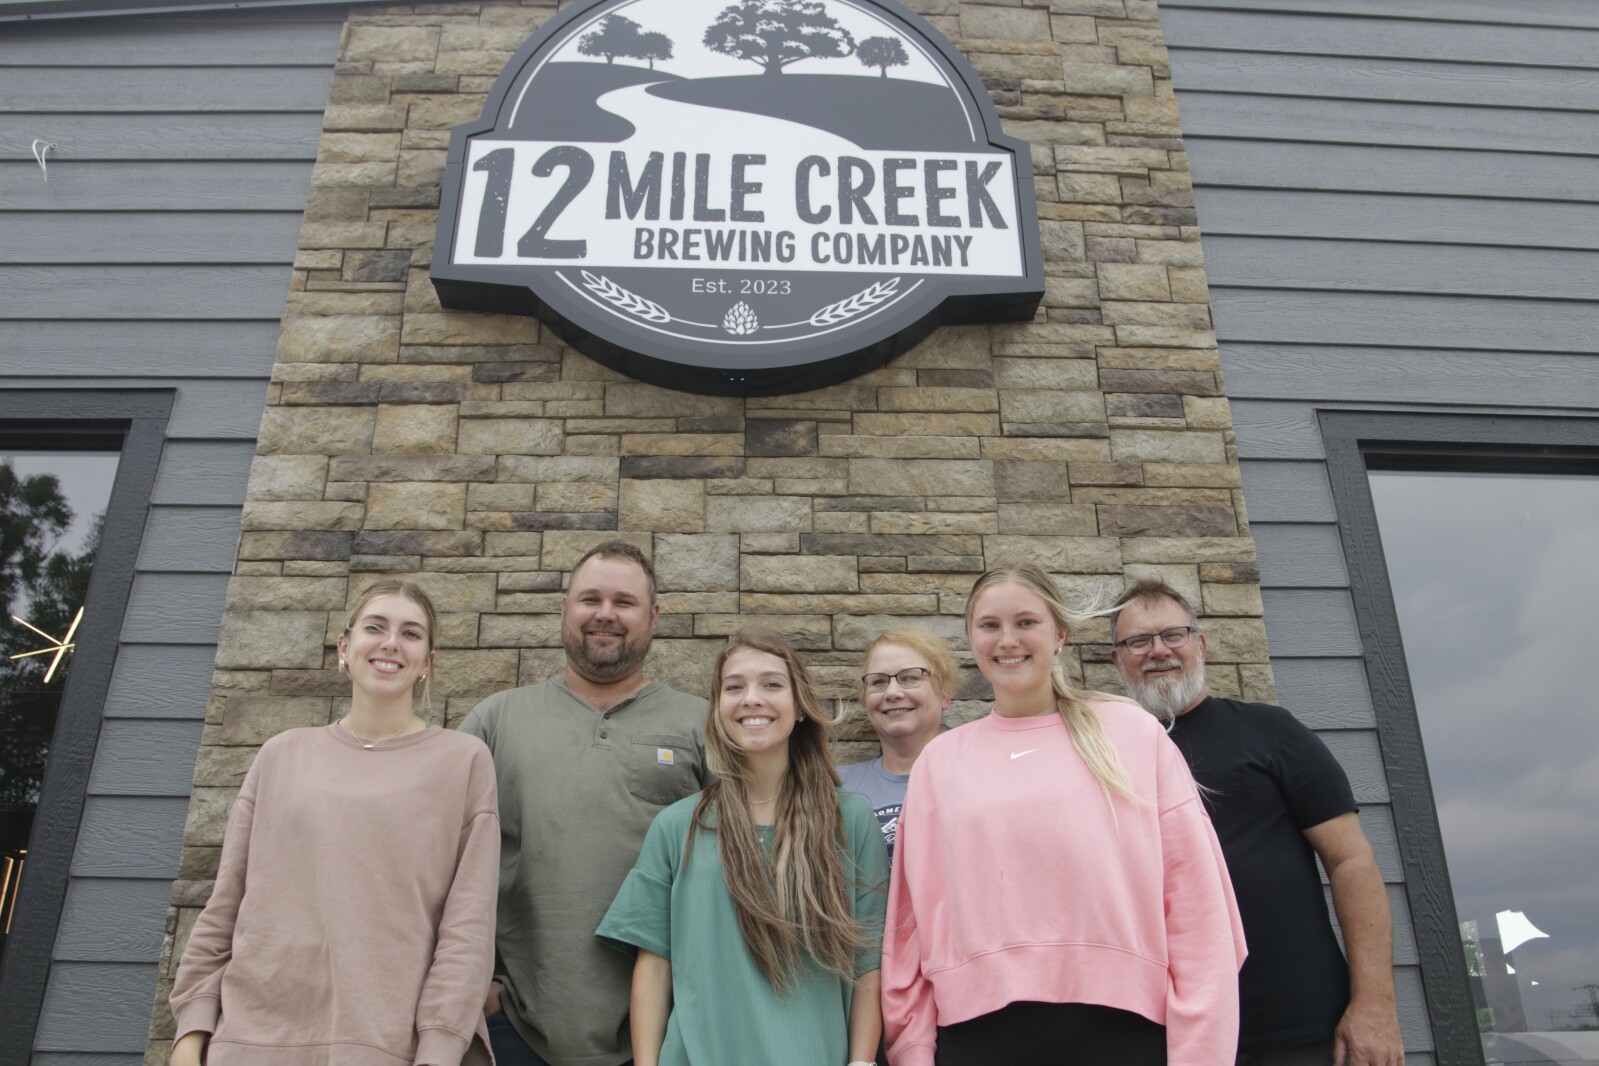 Community Gathering at 12 Mile Creek Brewing Company in Parkston